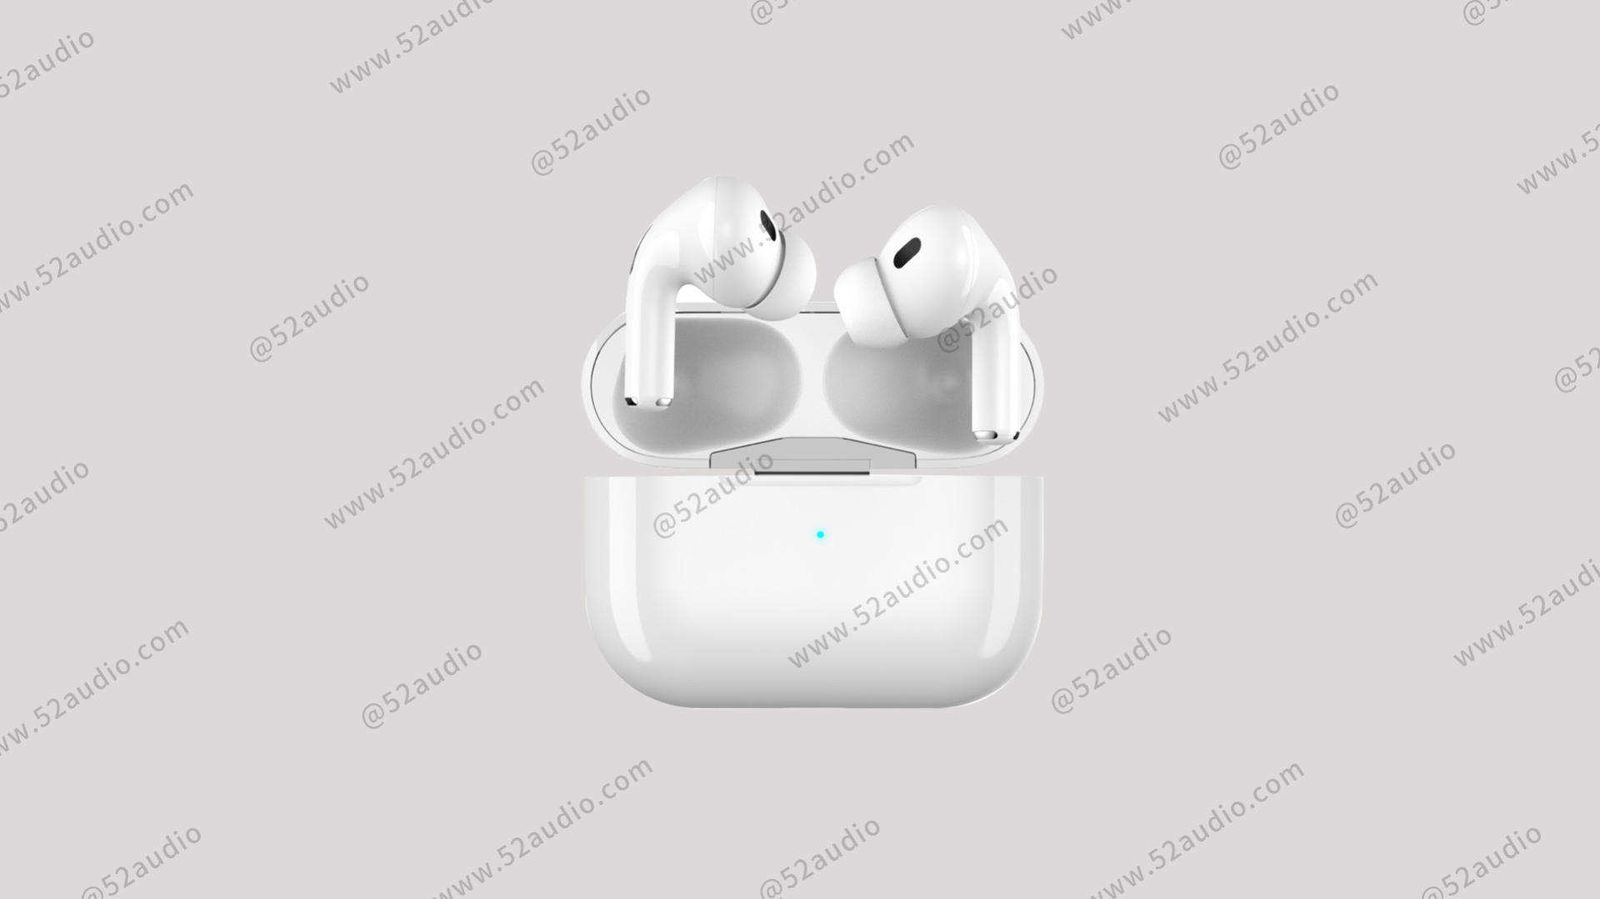 AirPods Pro 2 Said to Feature Upgraded H1 Chip, Find My, Heart 